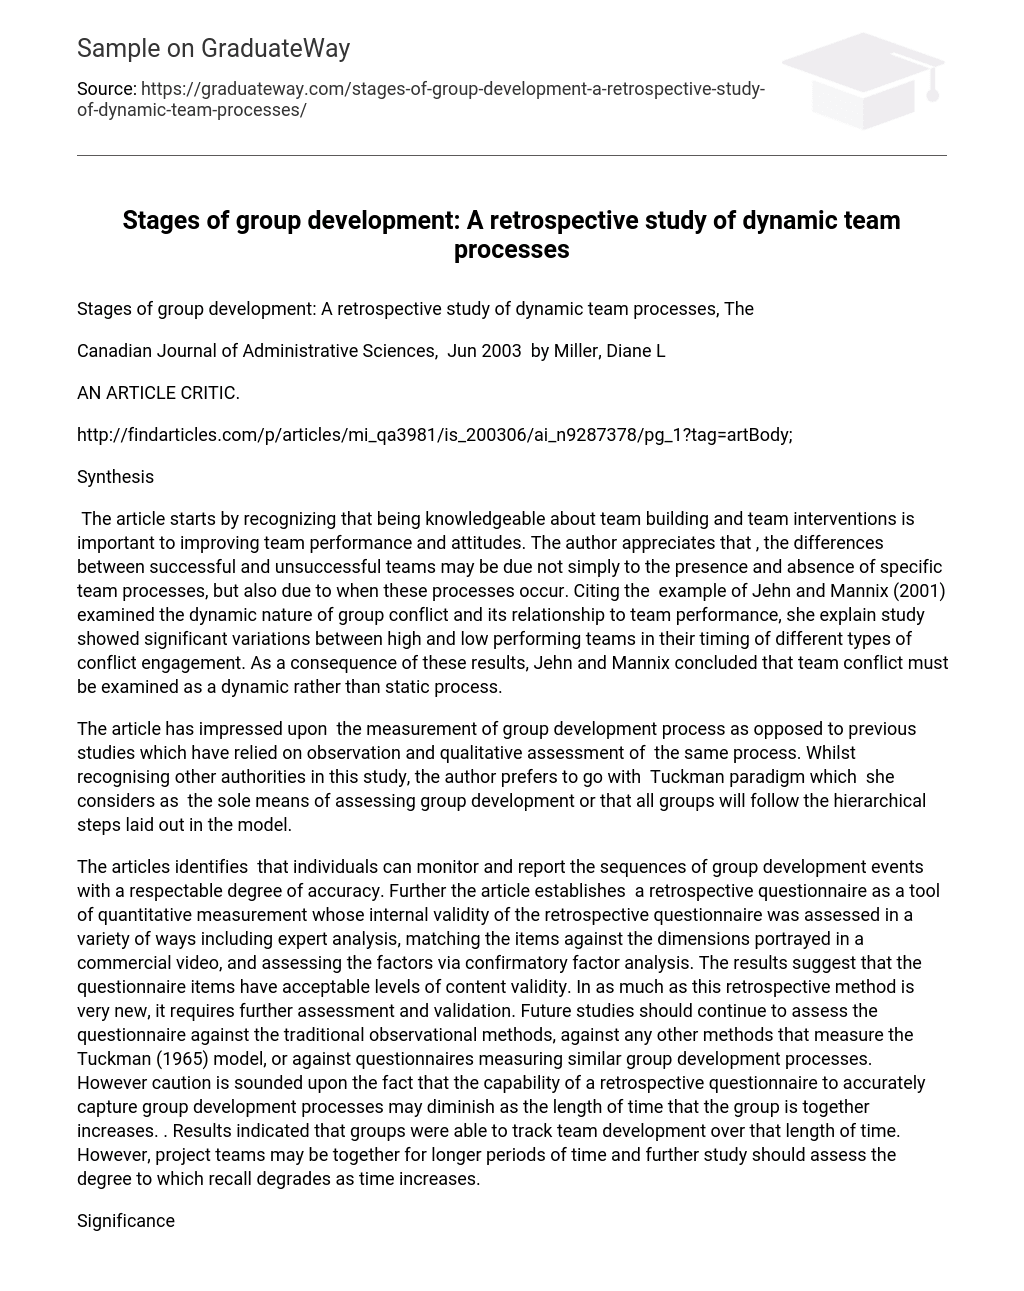 Stages of group development: A retrospective study of dynamic team processes